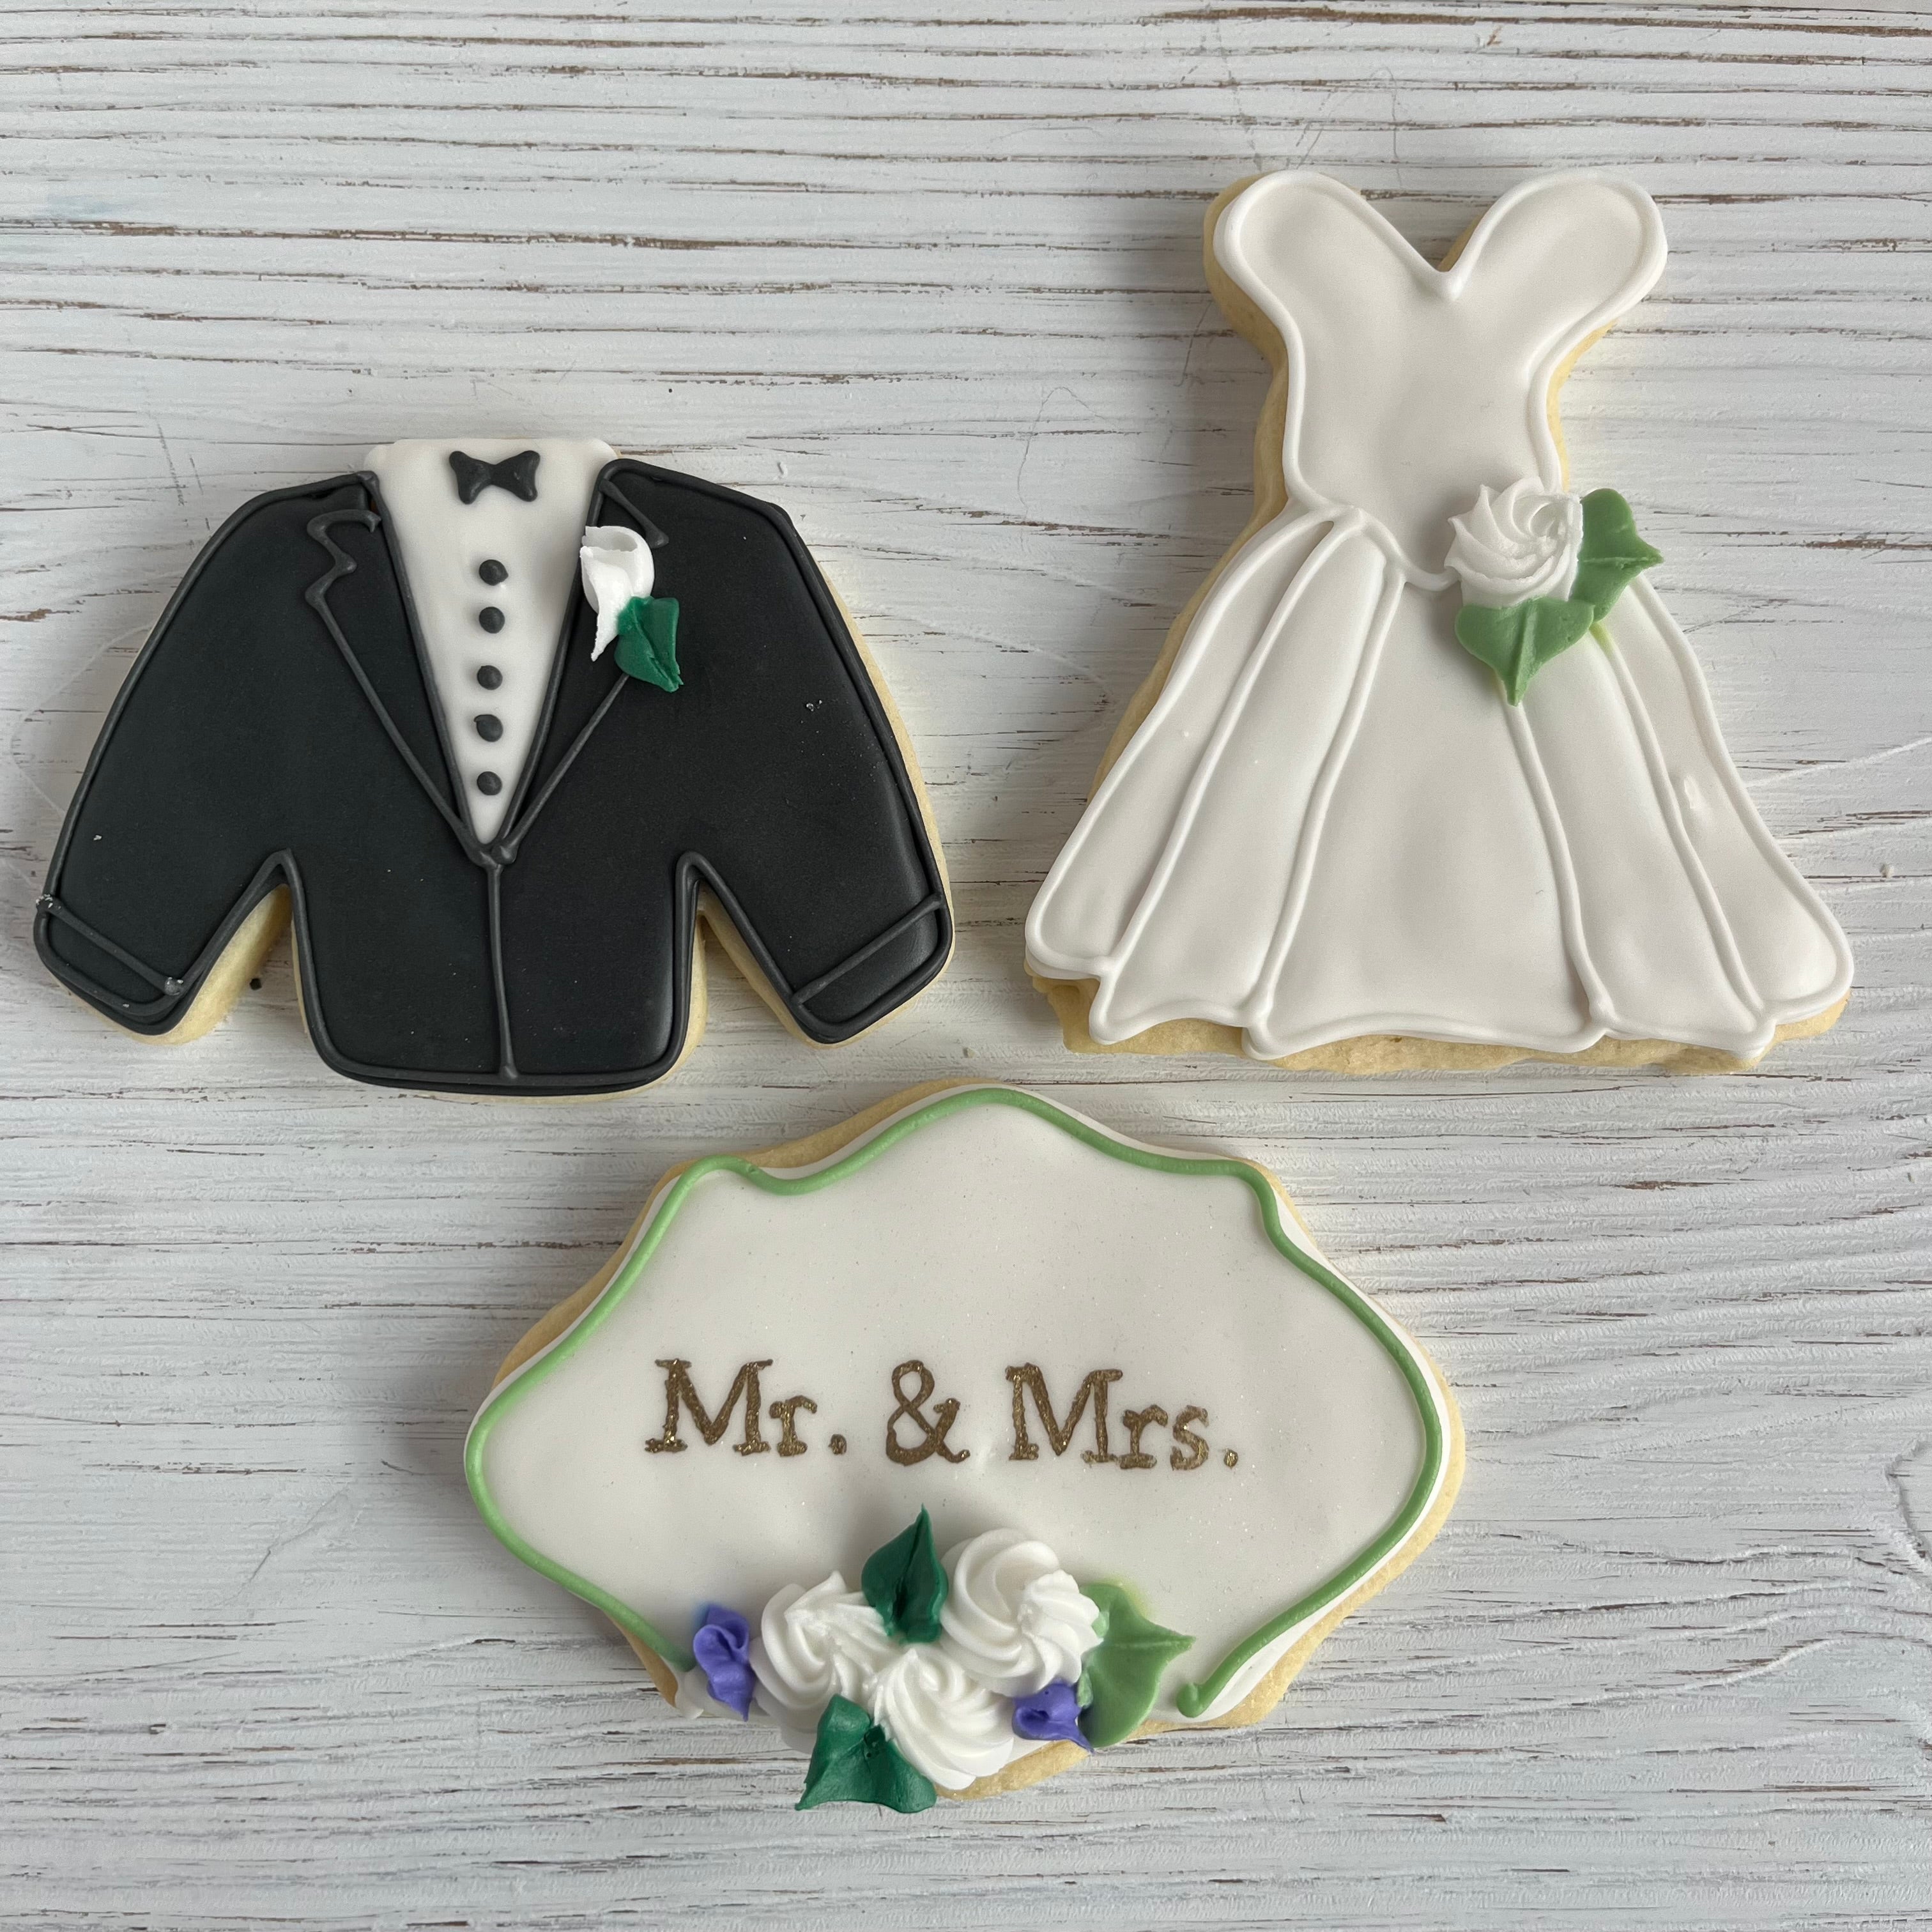 Bride, Groom, and Mr and Mrs Plaque Sugar Cookie Sets